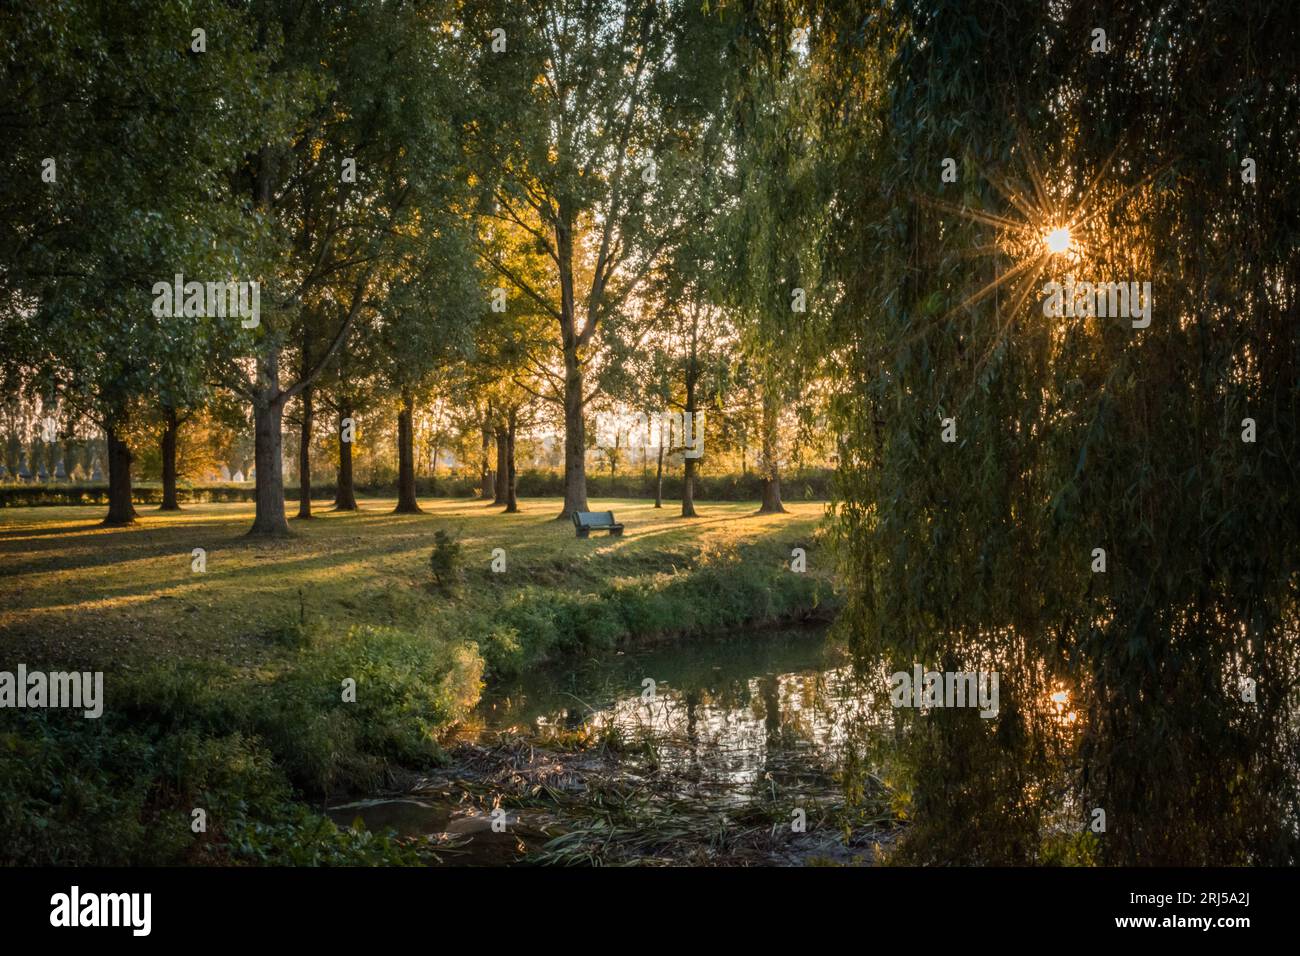 River image with sunburst and weeping willow trees in evening light Stock Photo